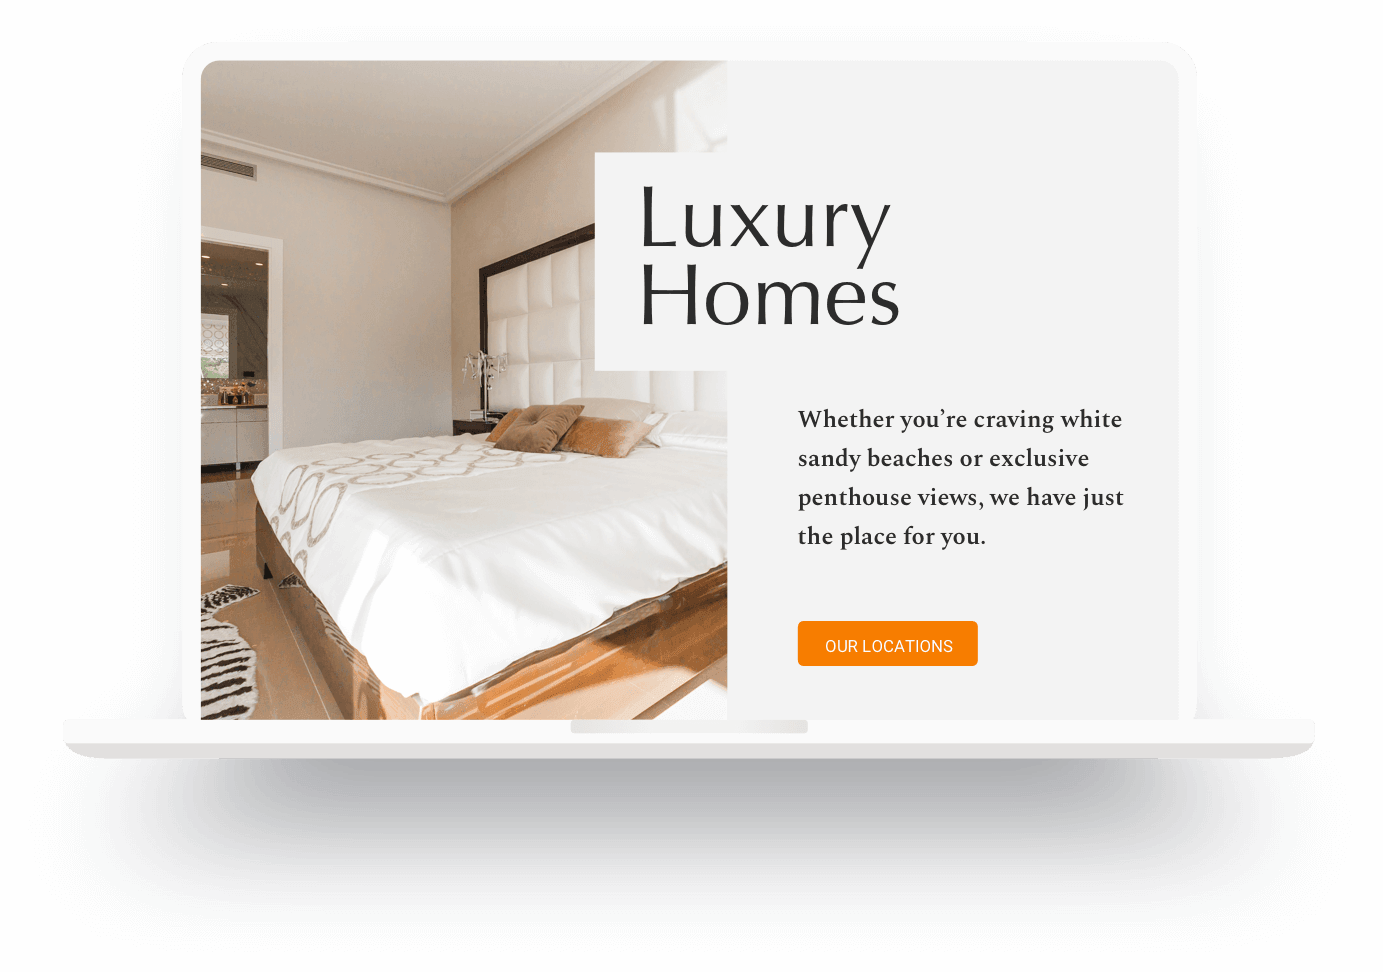 Example of a luxury property website built with Jimdo